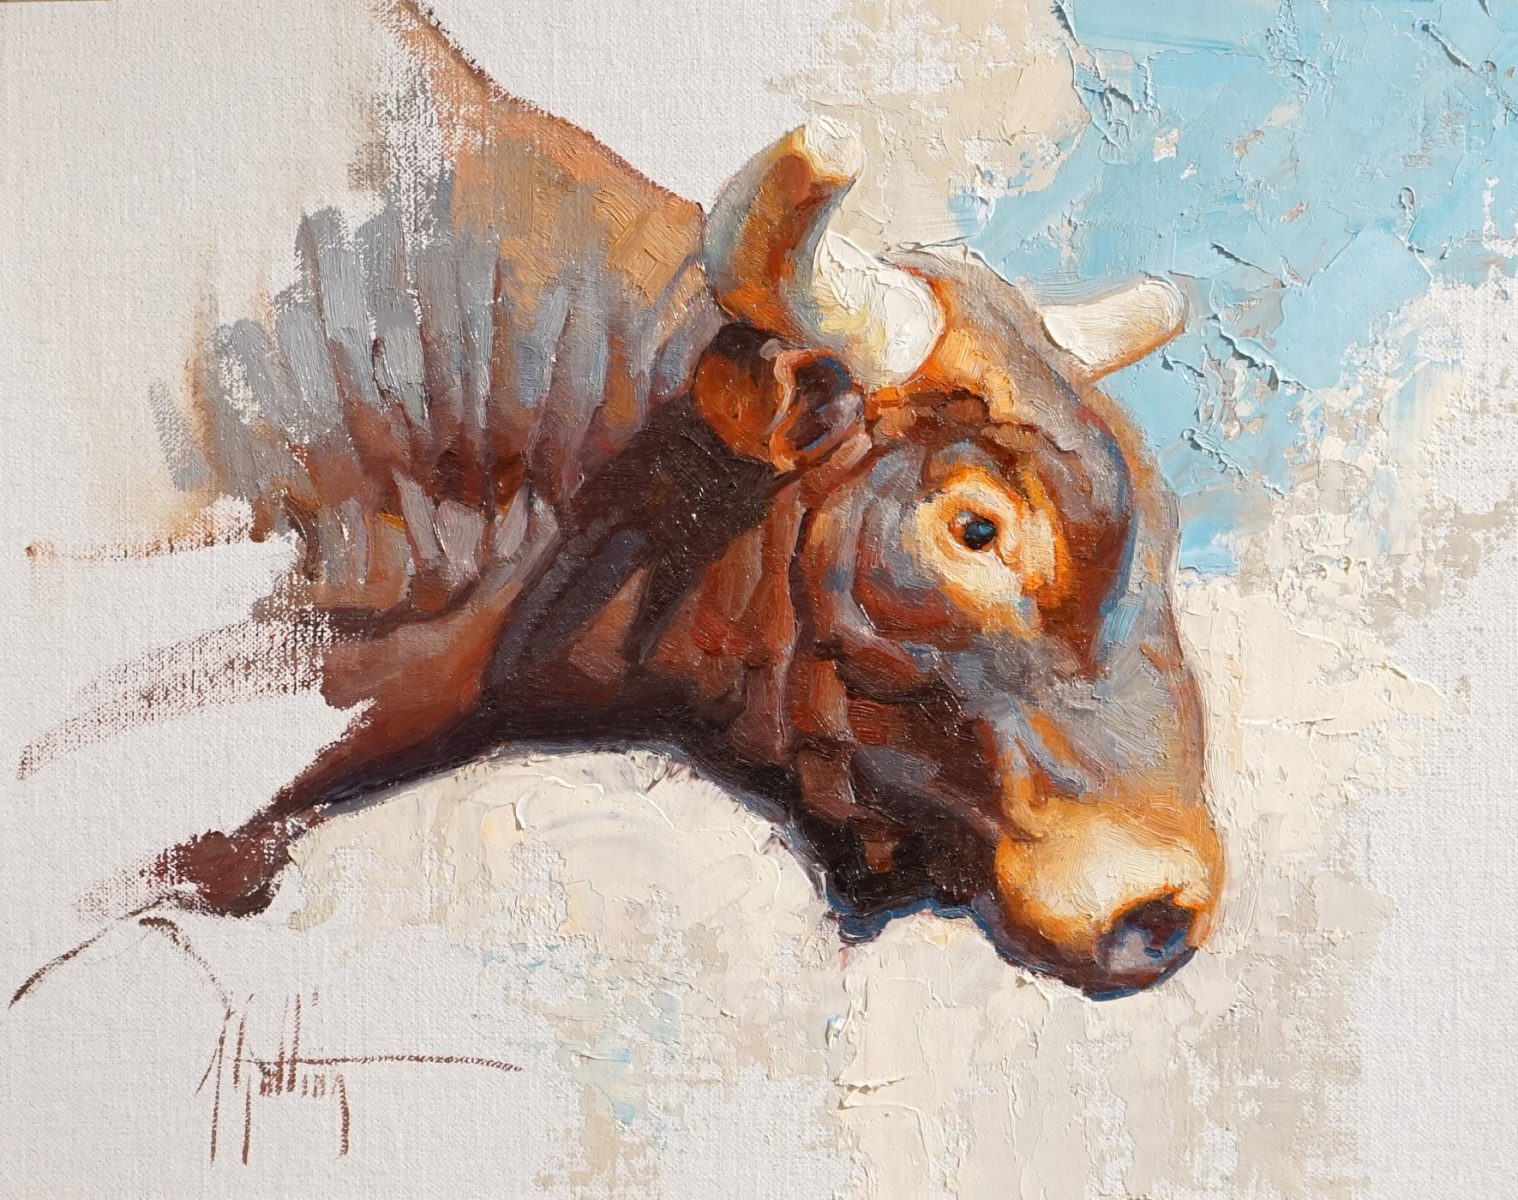 Oil painting depicting a side profile of an angry bull by Abigail Gutting